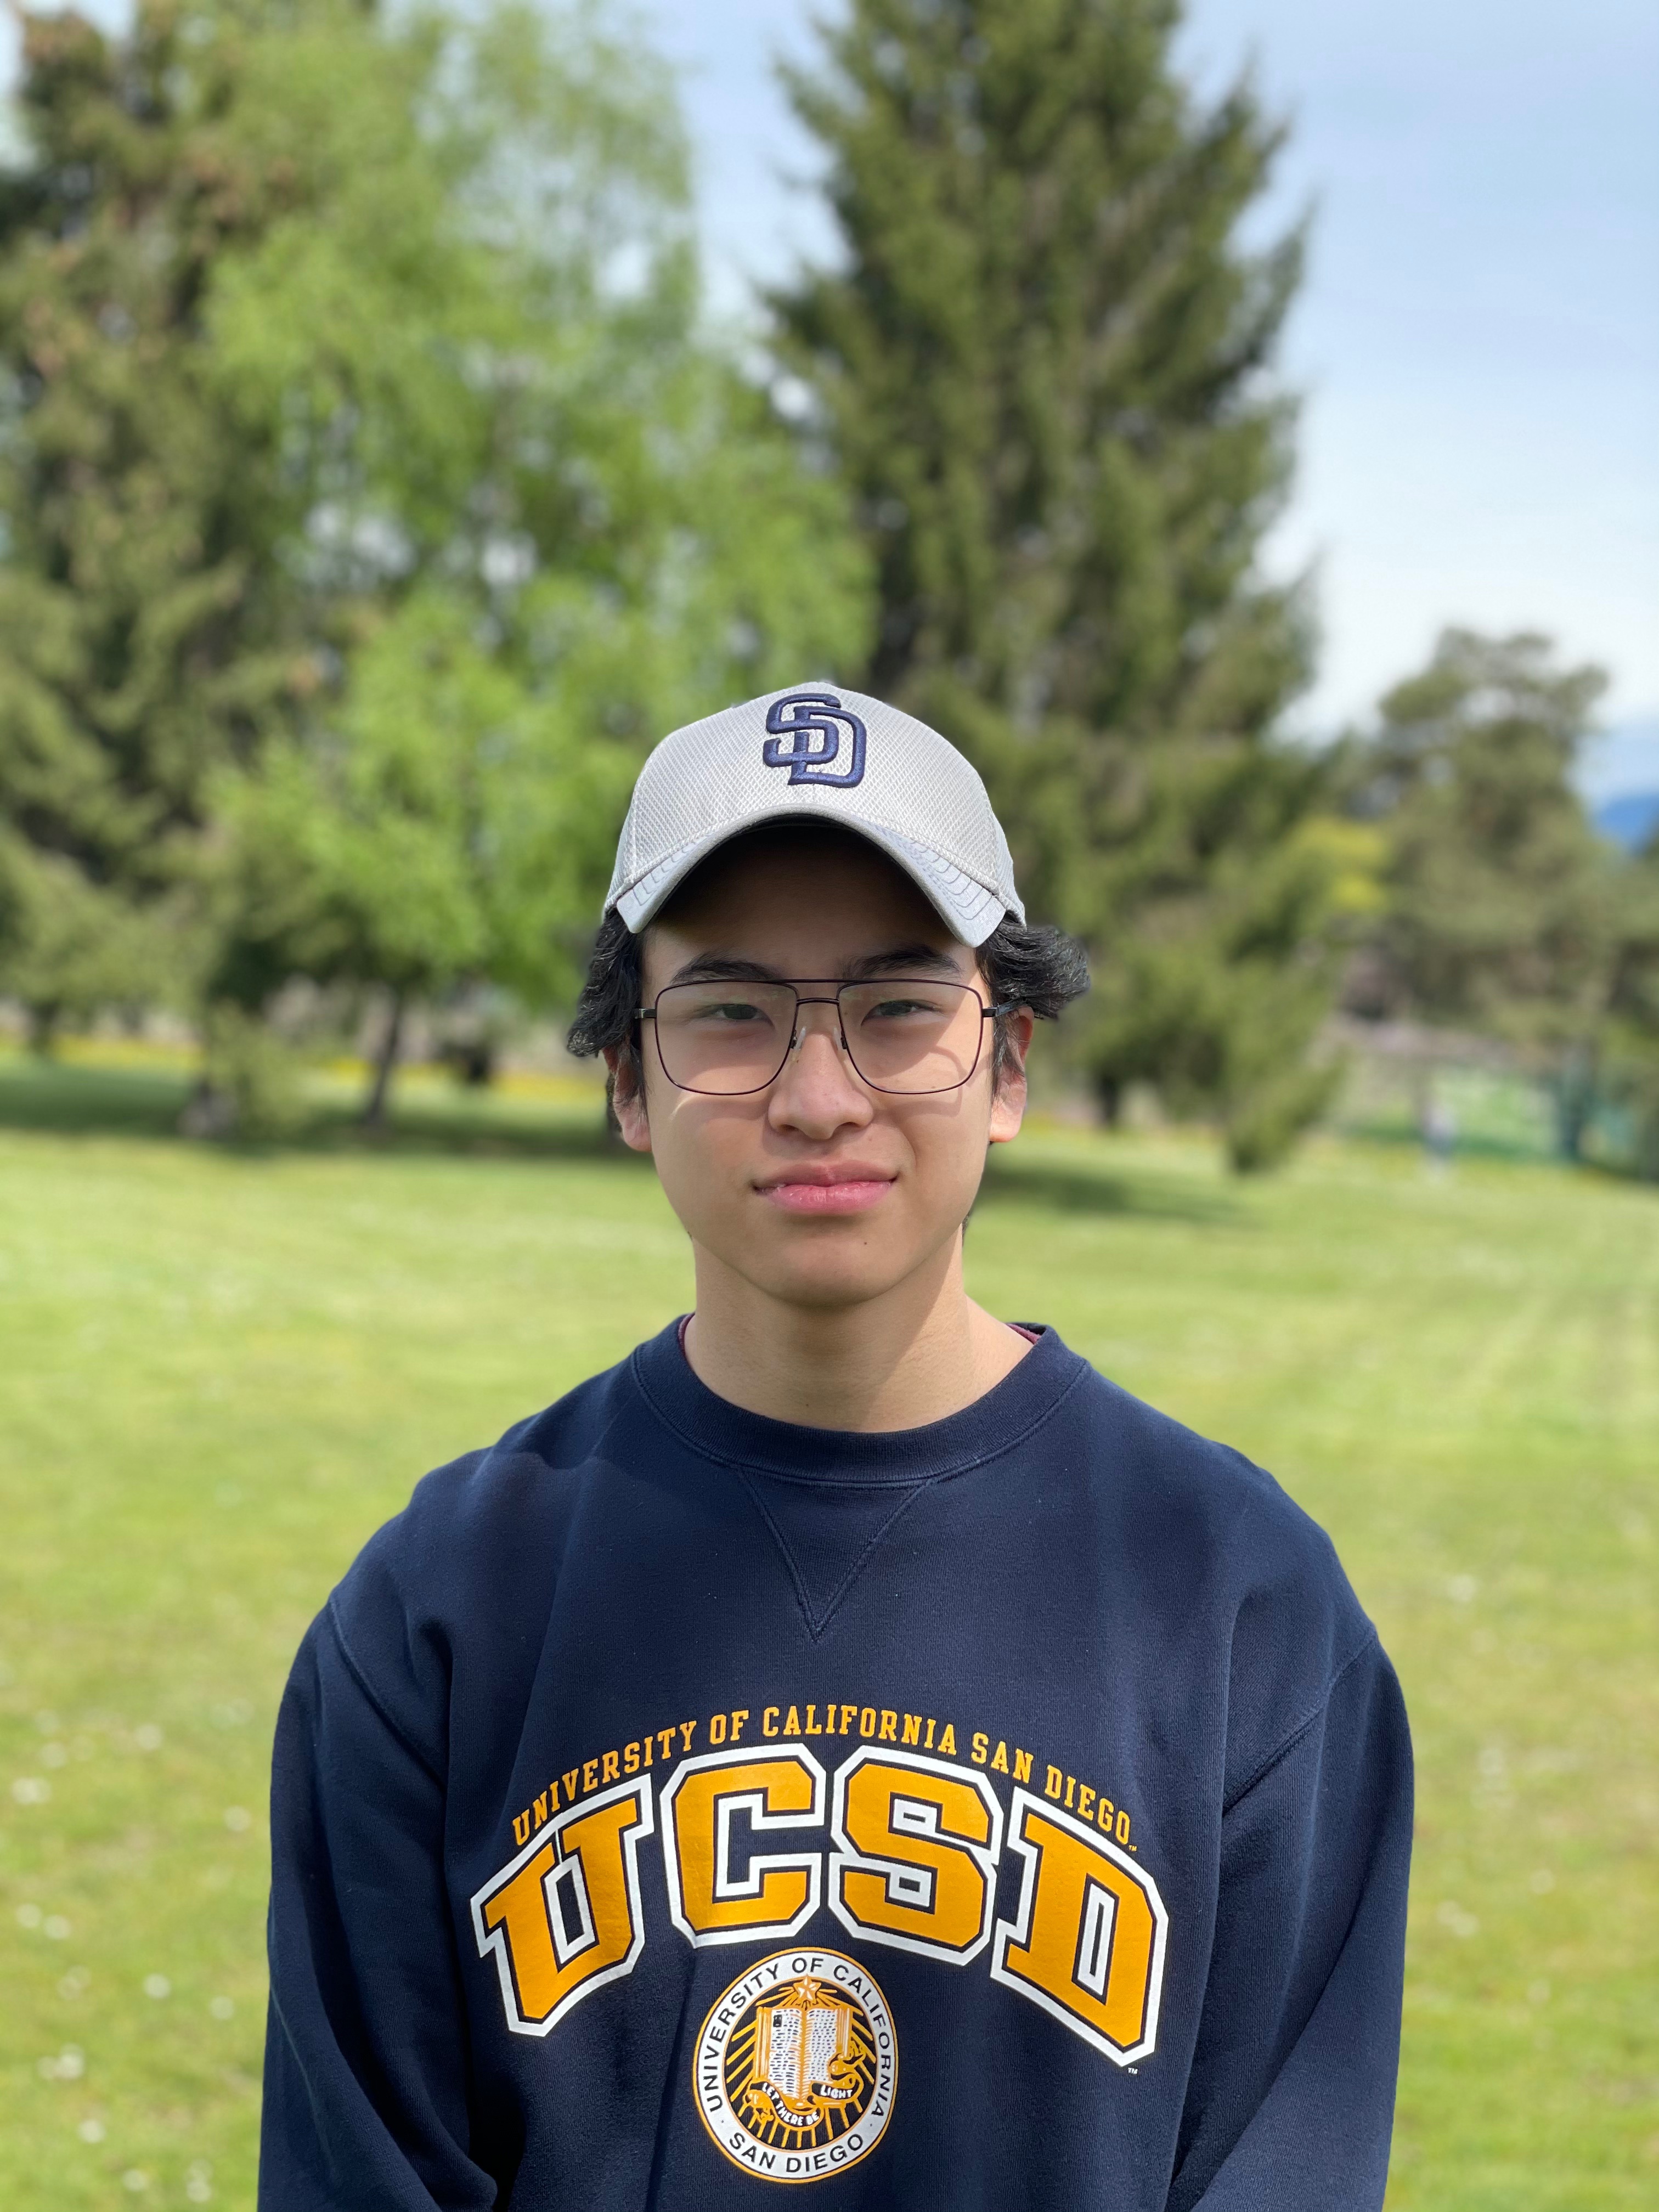 A man wearing glasses, a blue sweatshirt with gold letters stating “UCSD”, and a gray ballcap with “SD” embroidered on it stands on a green field. 